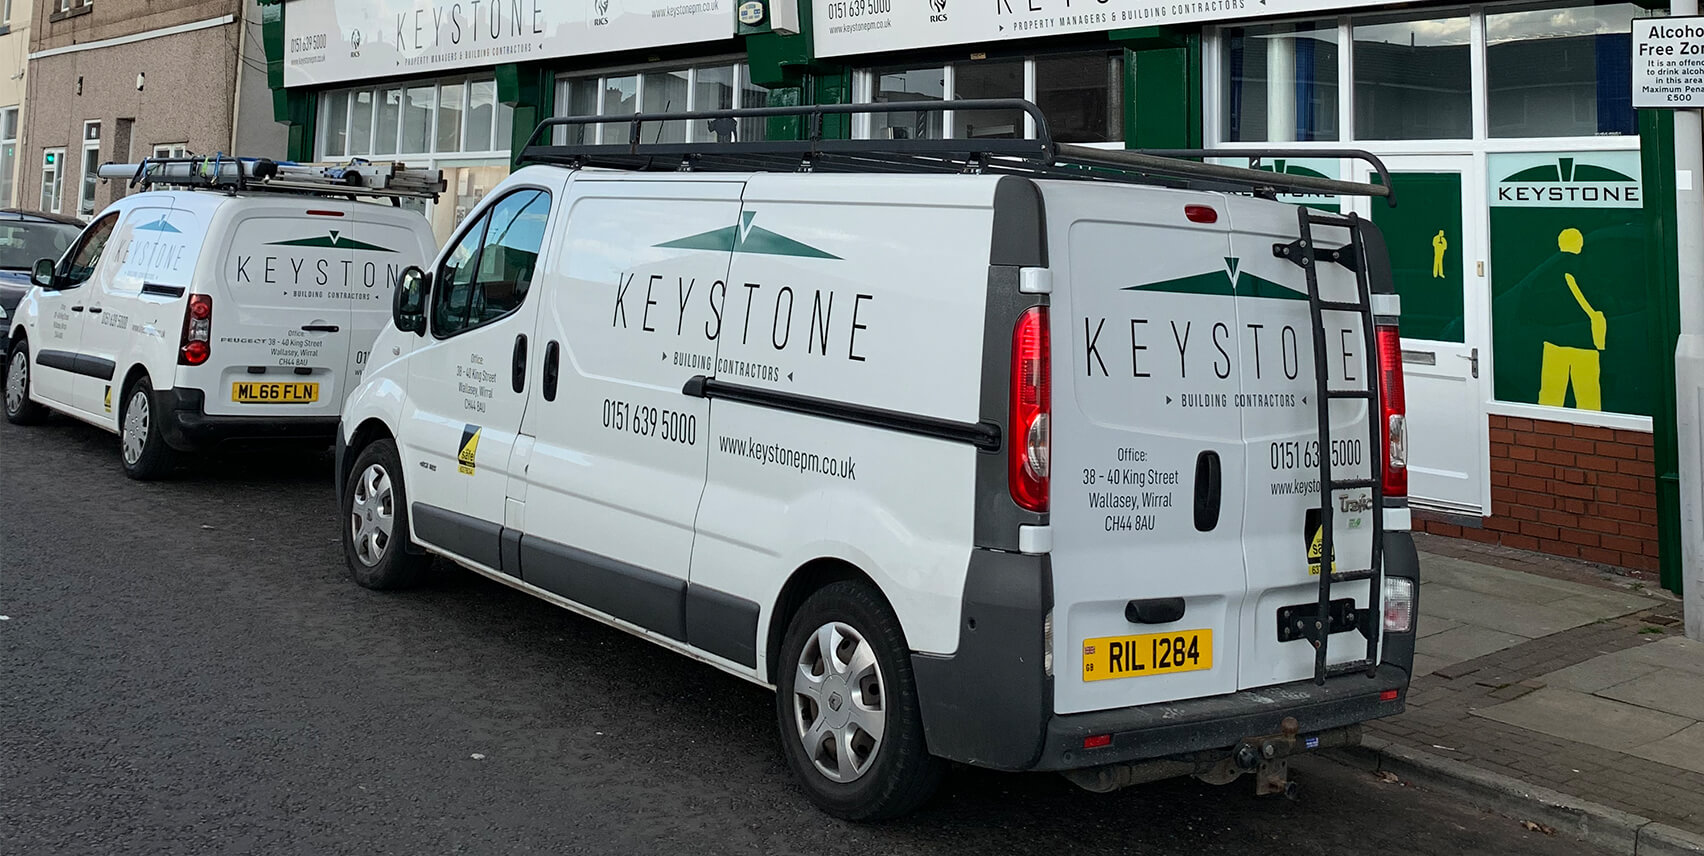 Keystone – Property Management and Building Contractors, Wirral, Liverpool